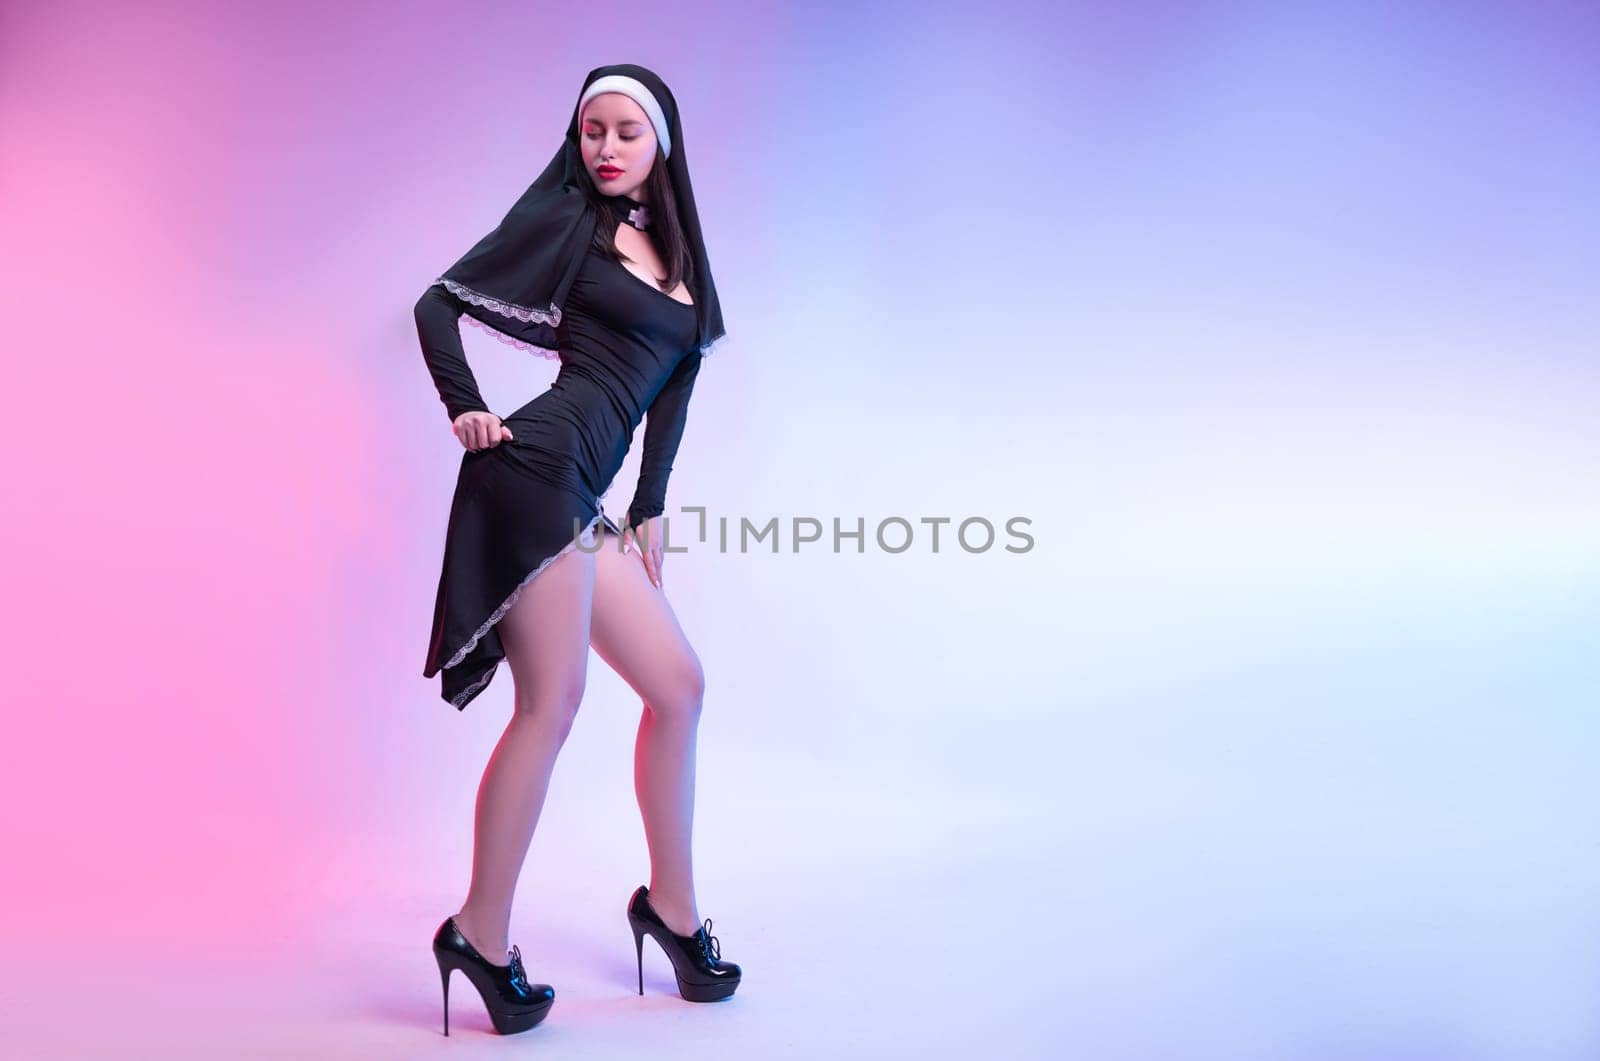 A nun girl in a sexy dress defiantly poses naked on a neon background of a copy paste by Rotozey